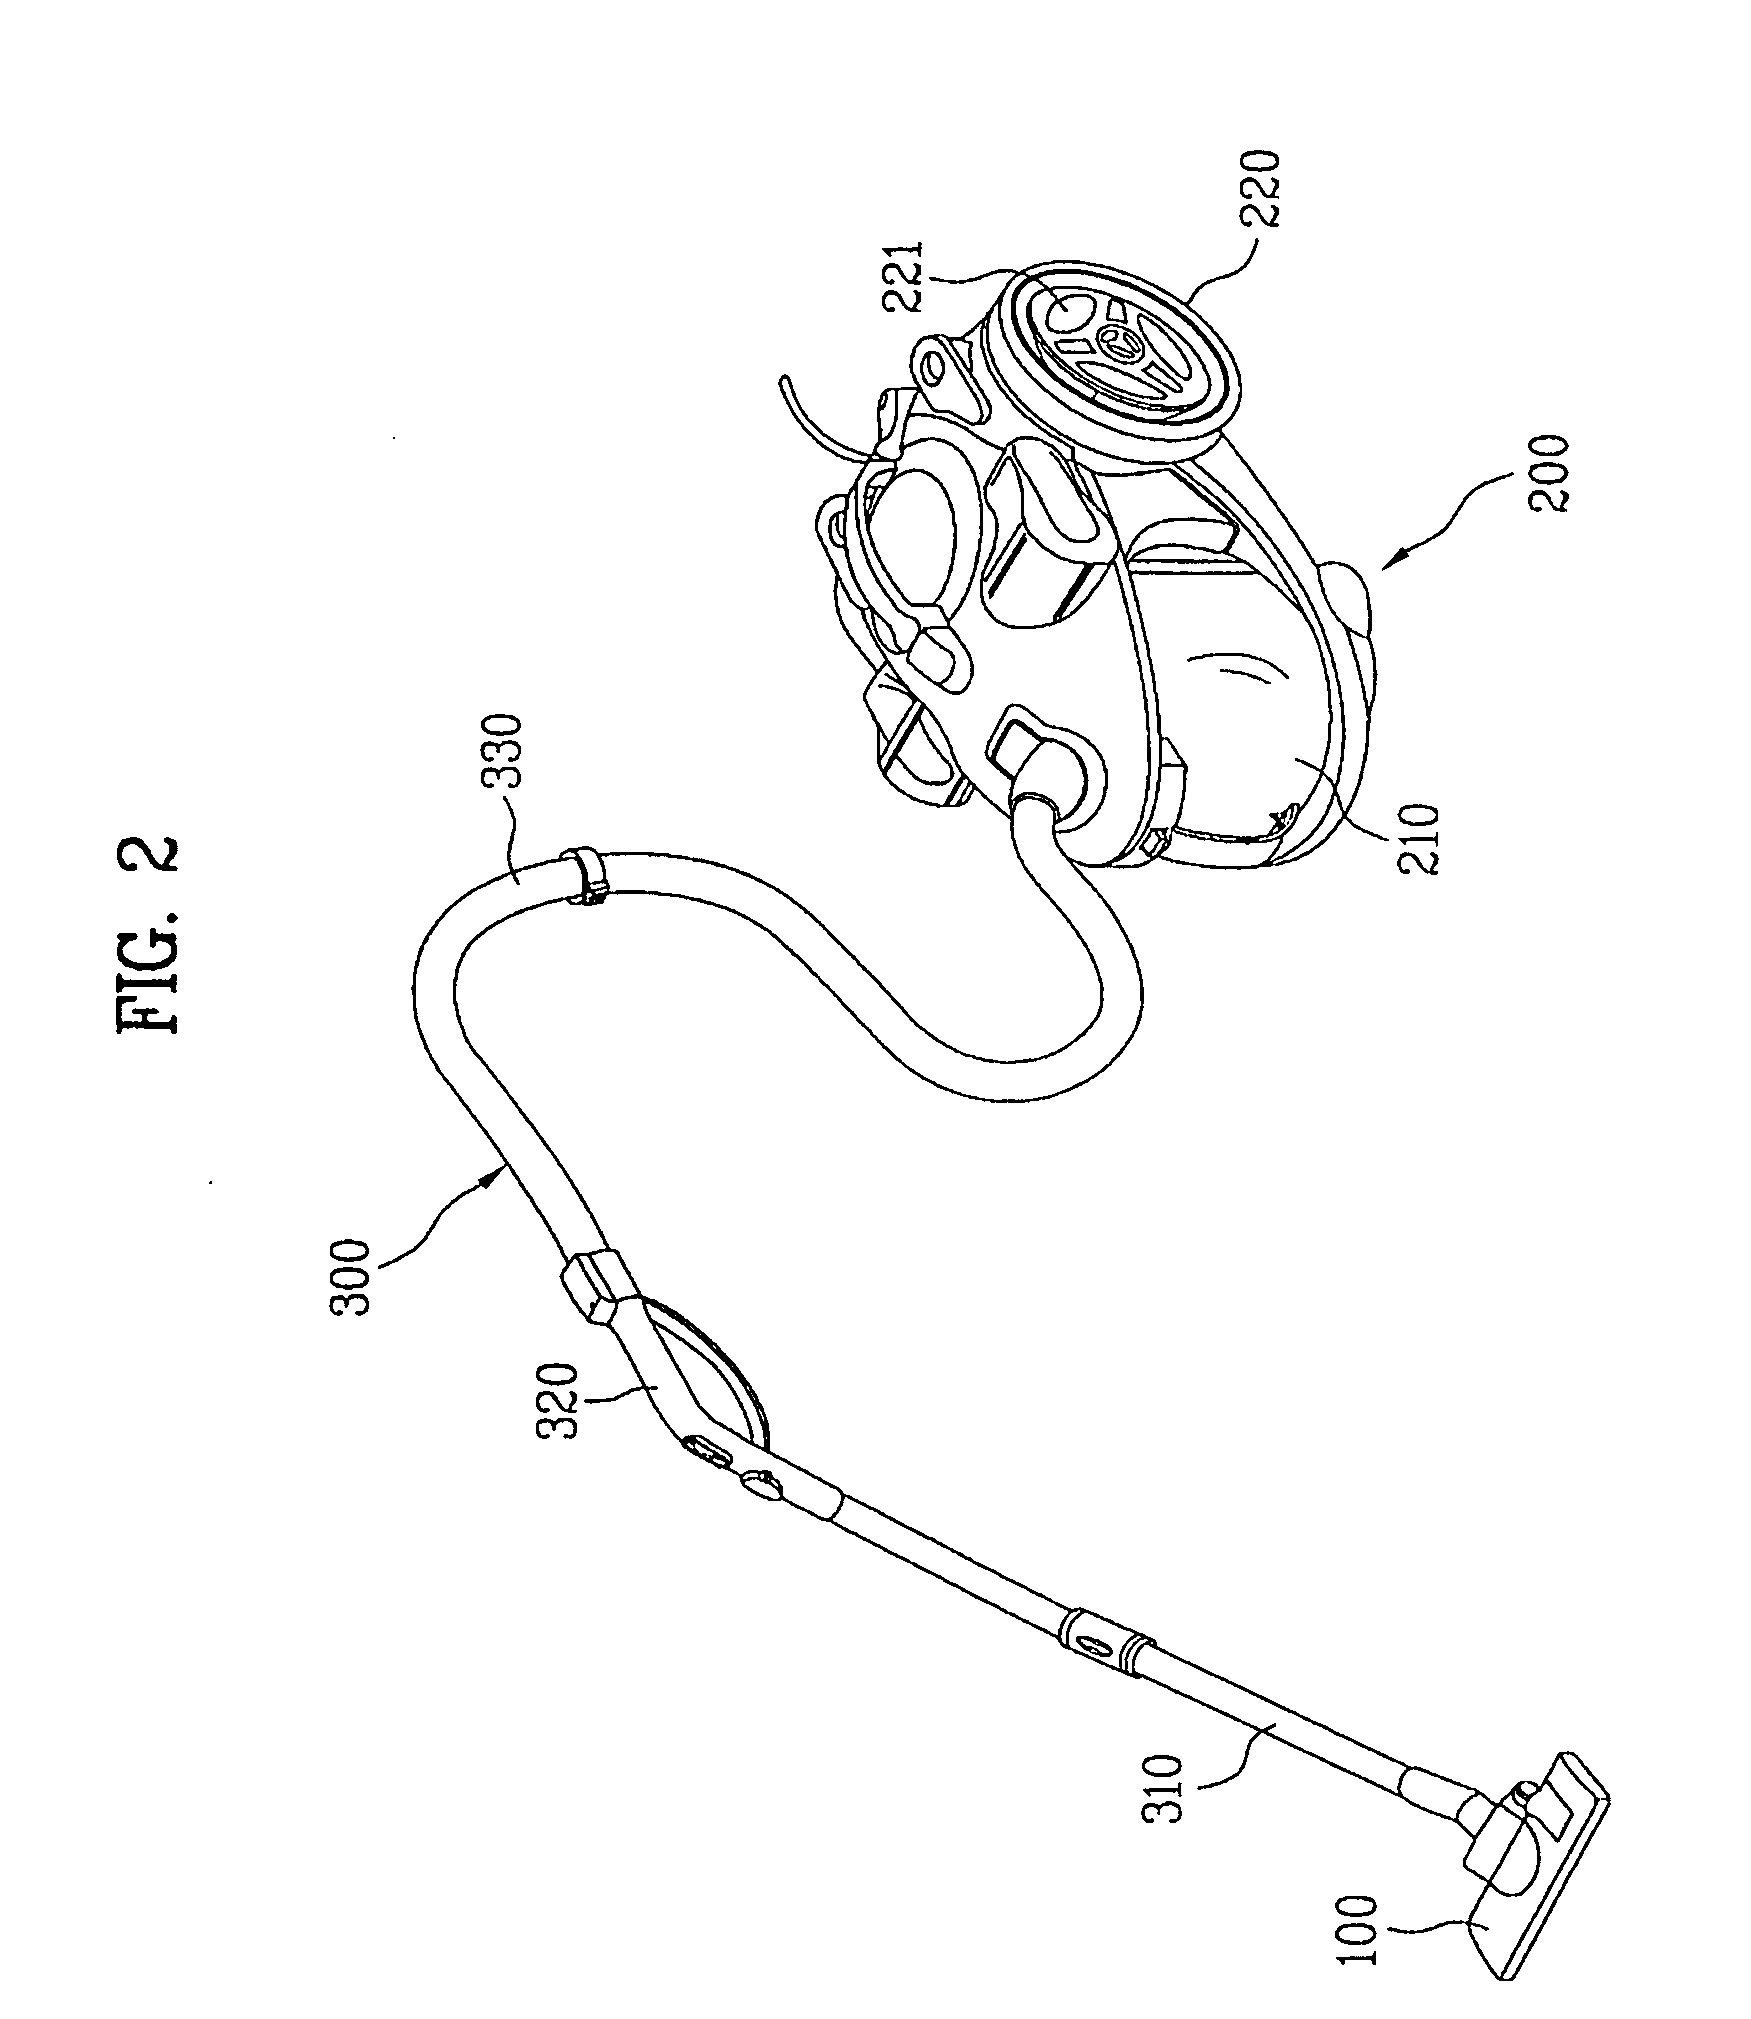 Intake nozzle and vacuum cleaner having the same